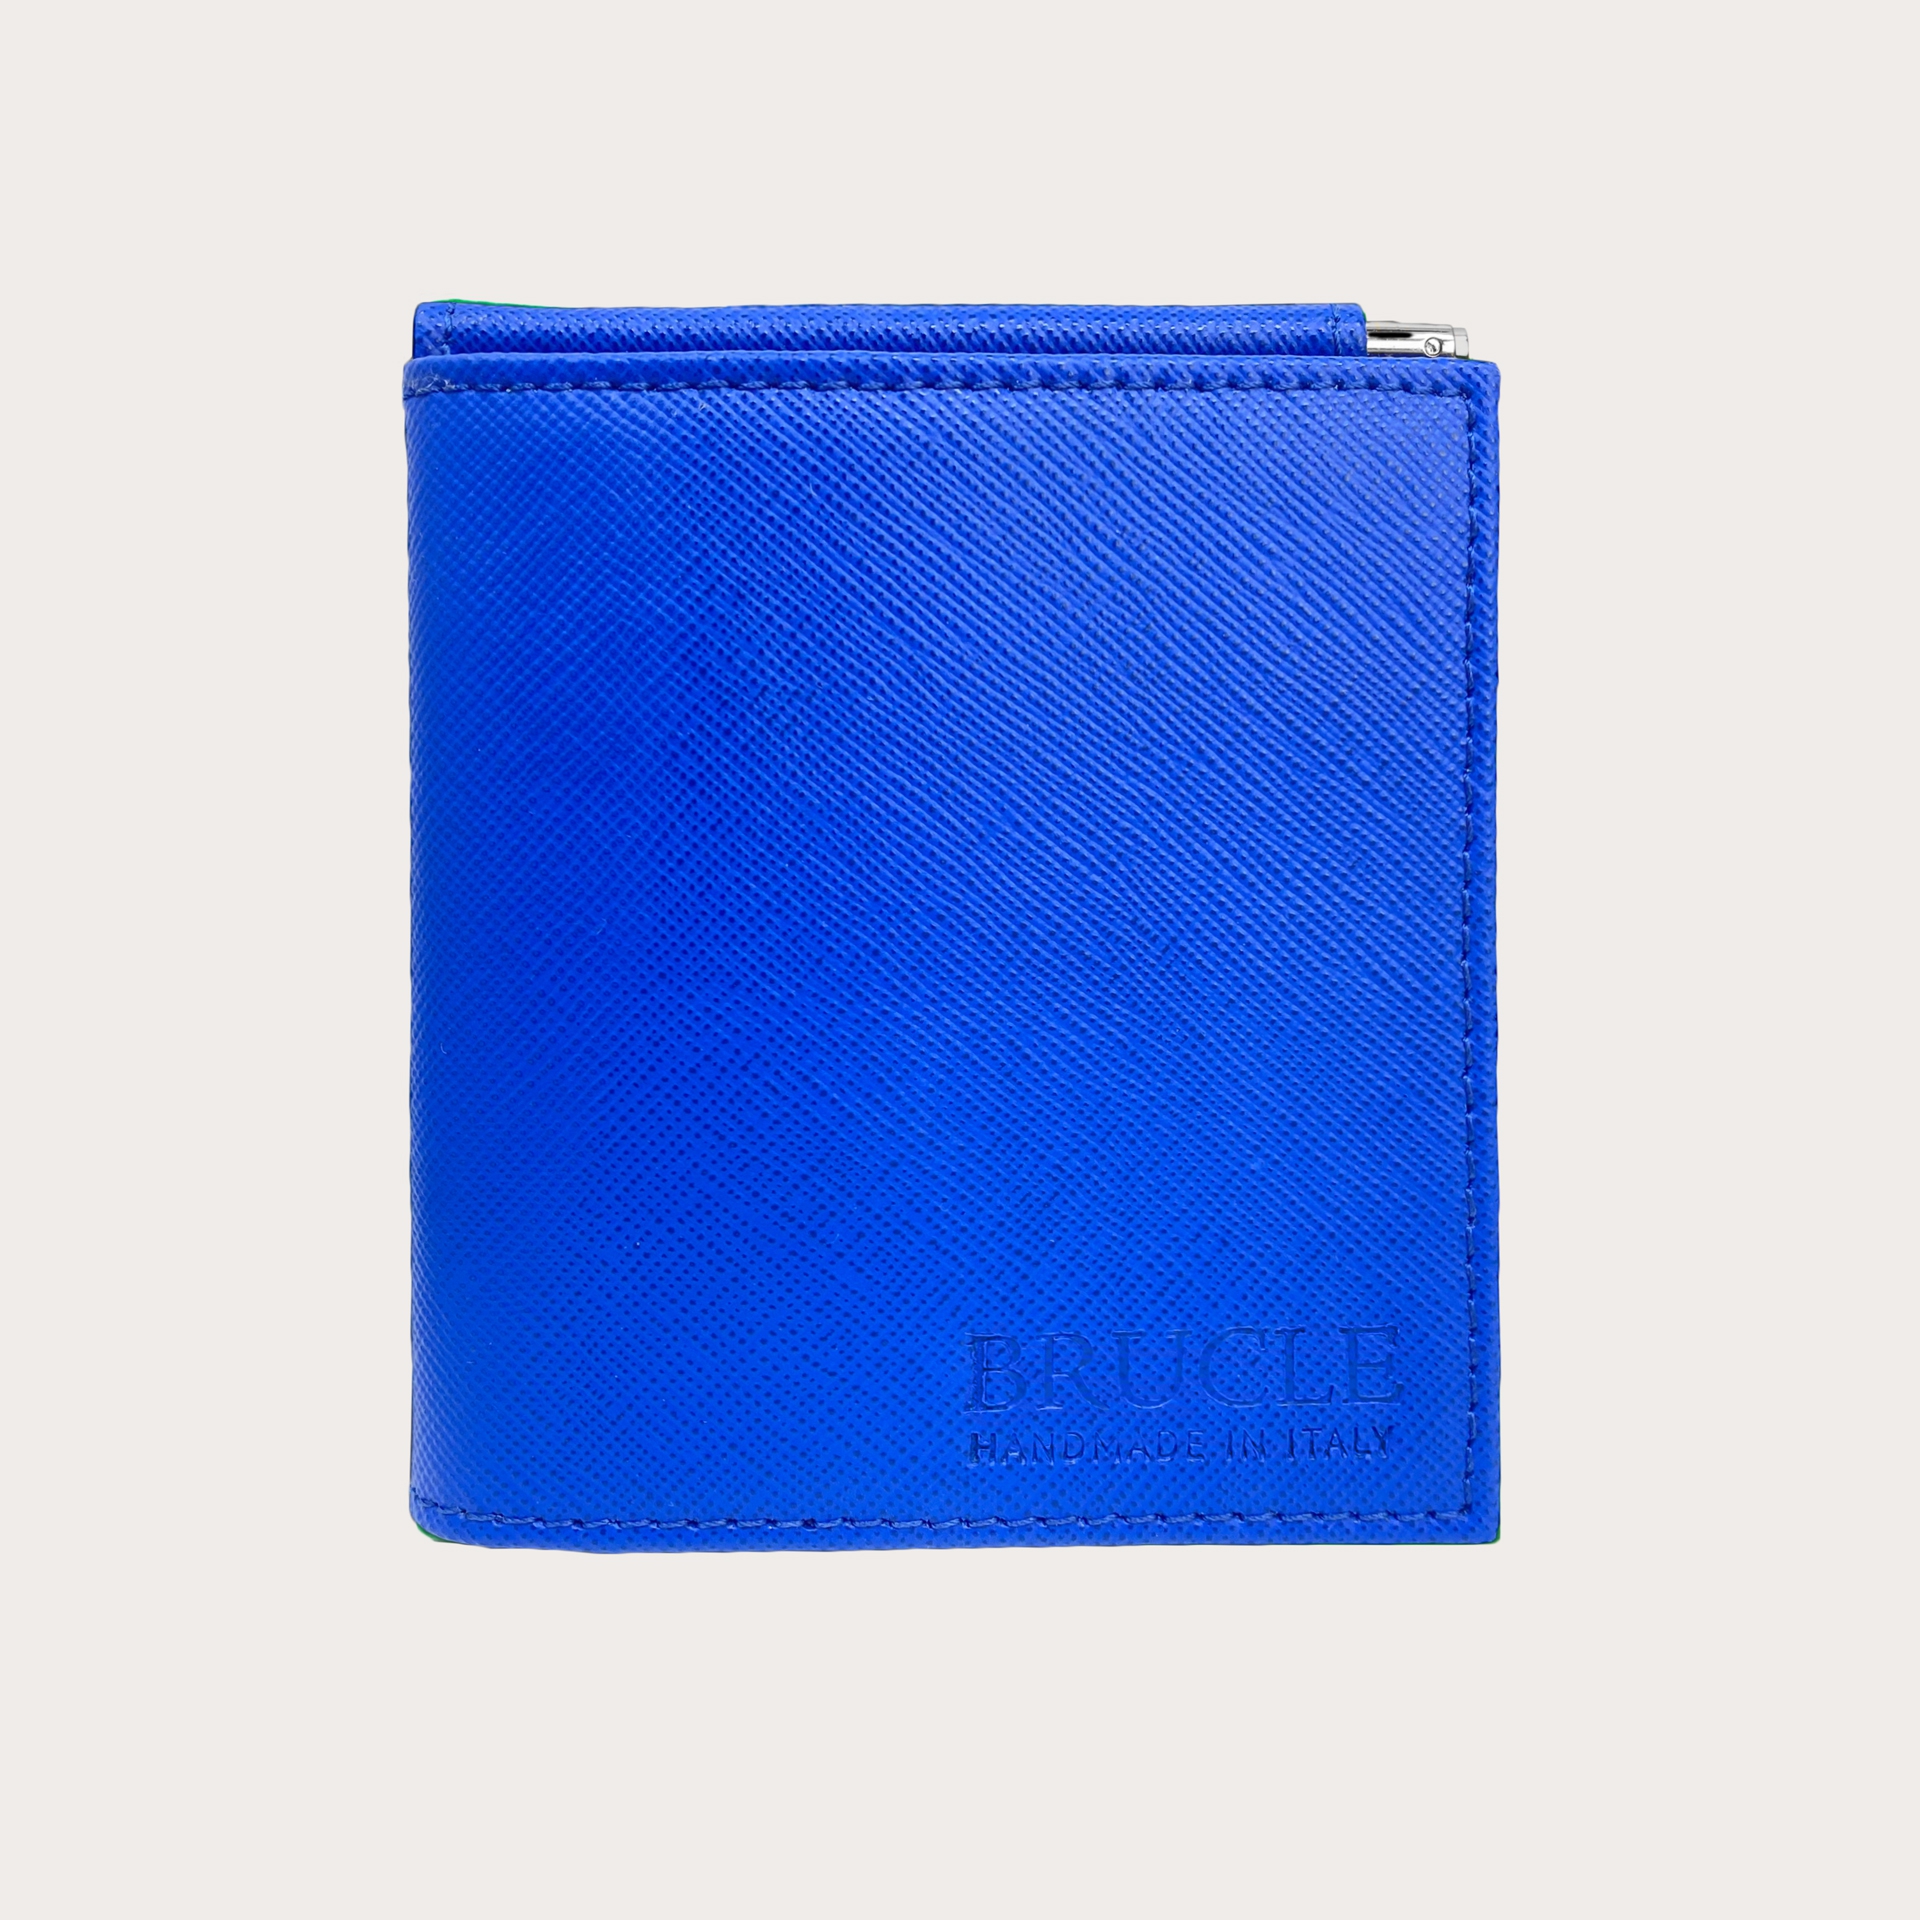 BRUCLE Compact mini wallet blue royal saffiano with money clip and coin purse